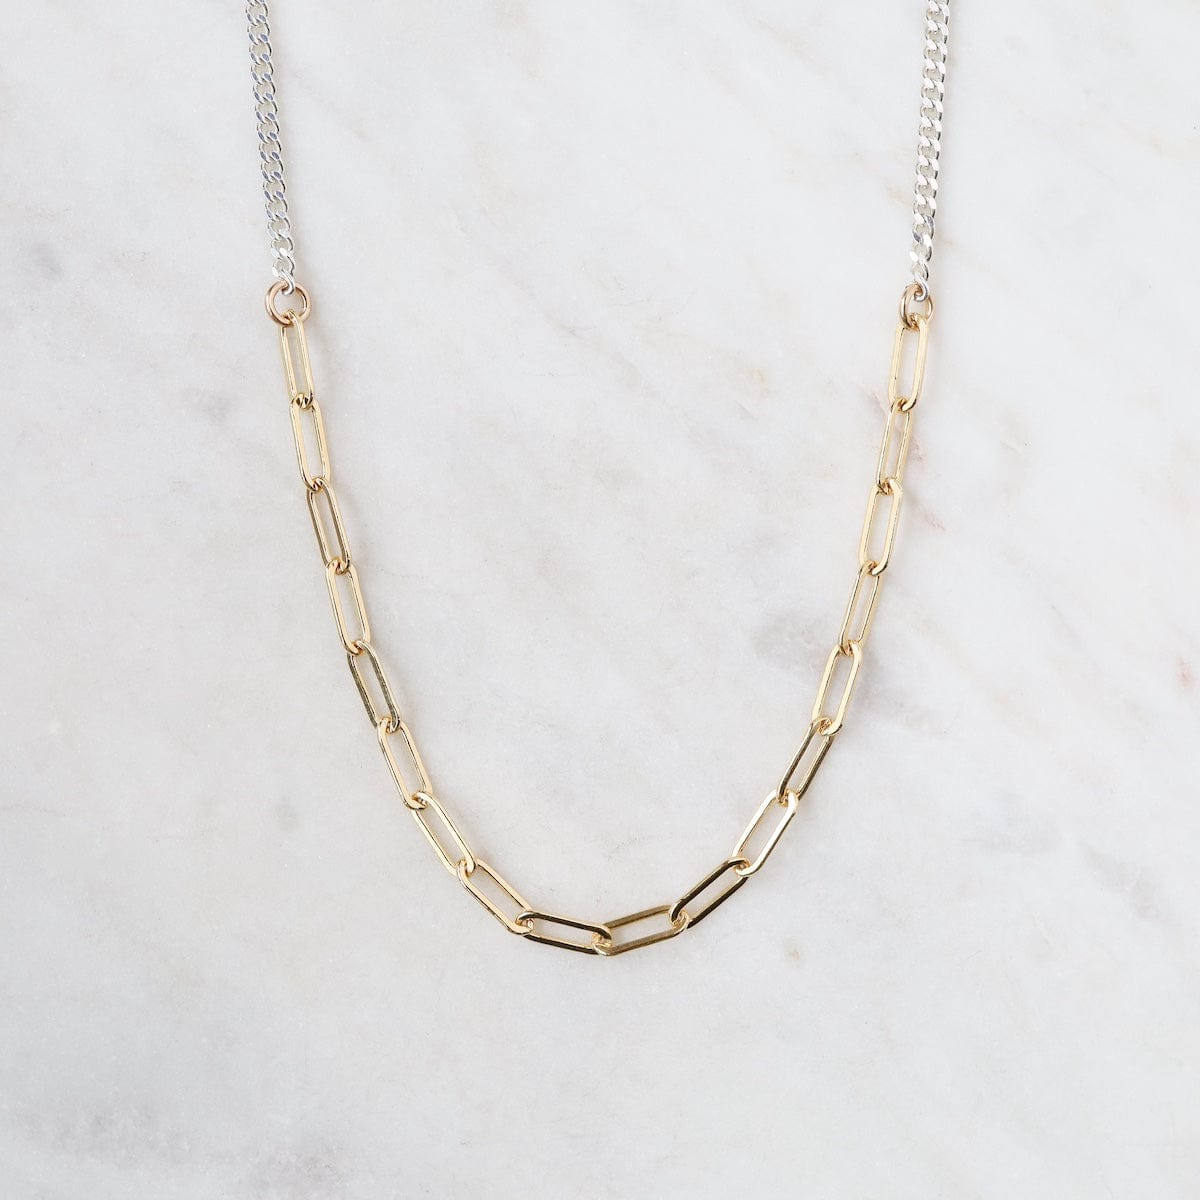 NKL-GF 18" Sterling Silver Curb Chain with Gold Filled Fl